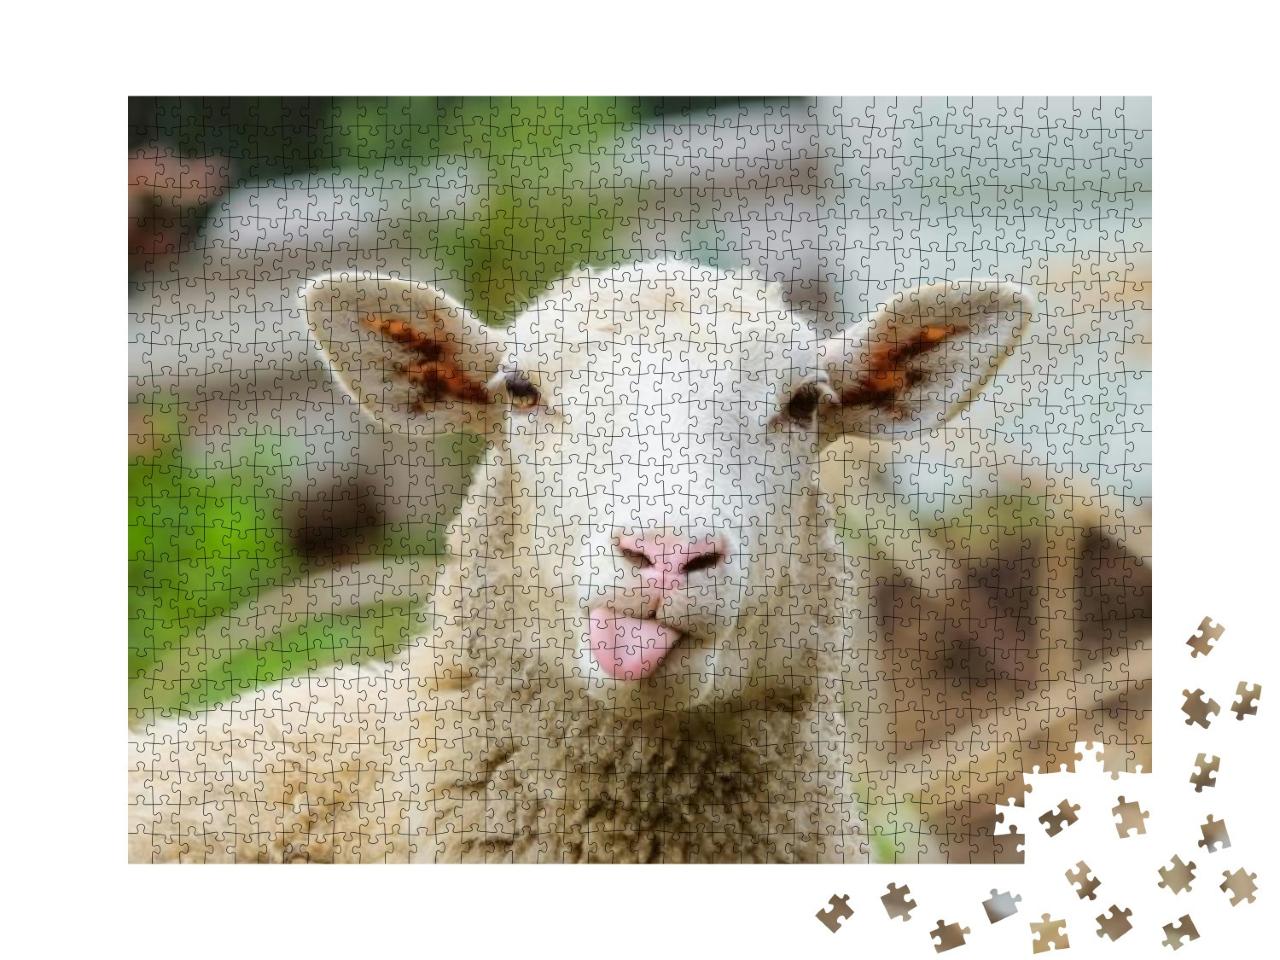 Funny Sheep. Portrait of Sheep Showing Tongue... Jigsaw Puzzle with 1000 pieces